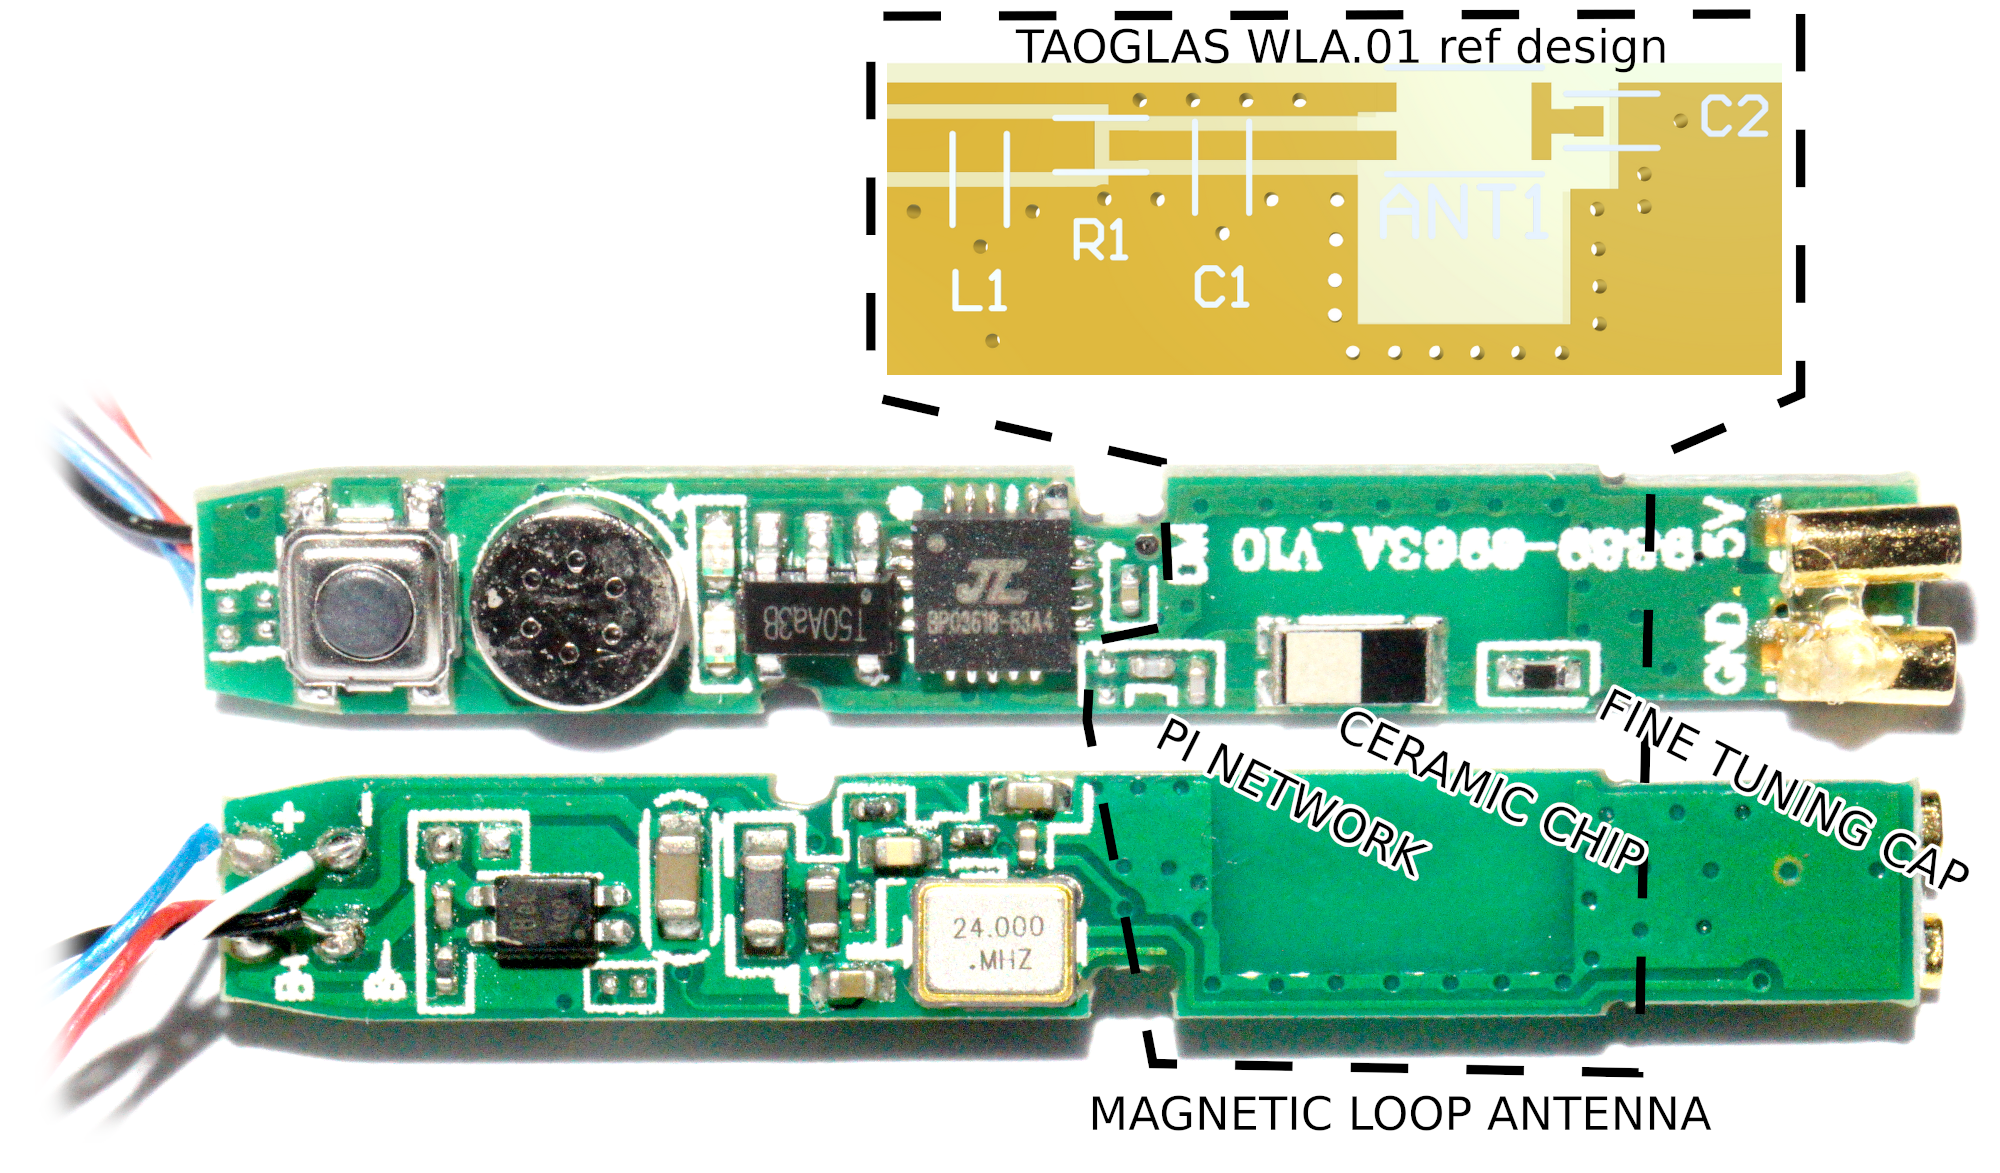 PCB closeup with marked antenna